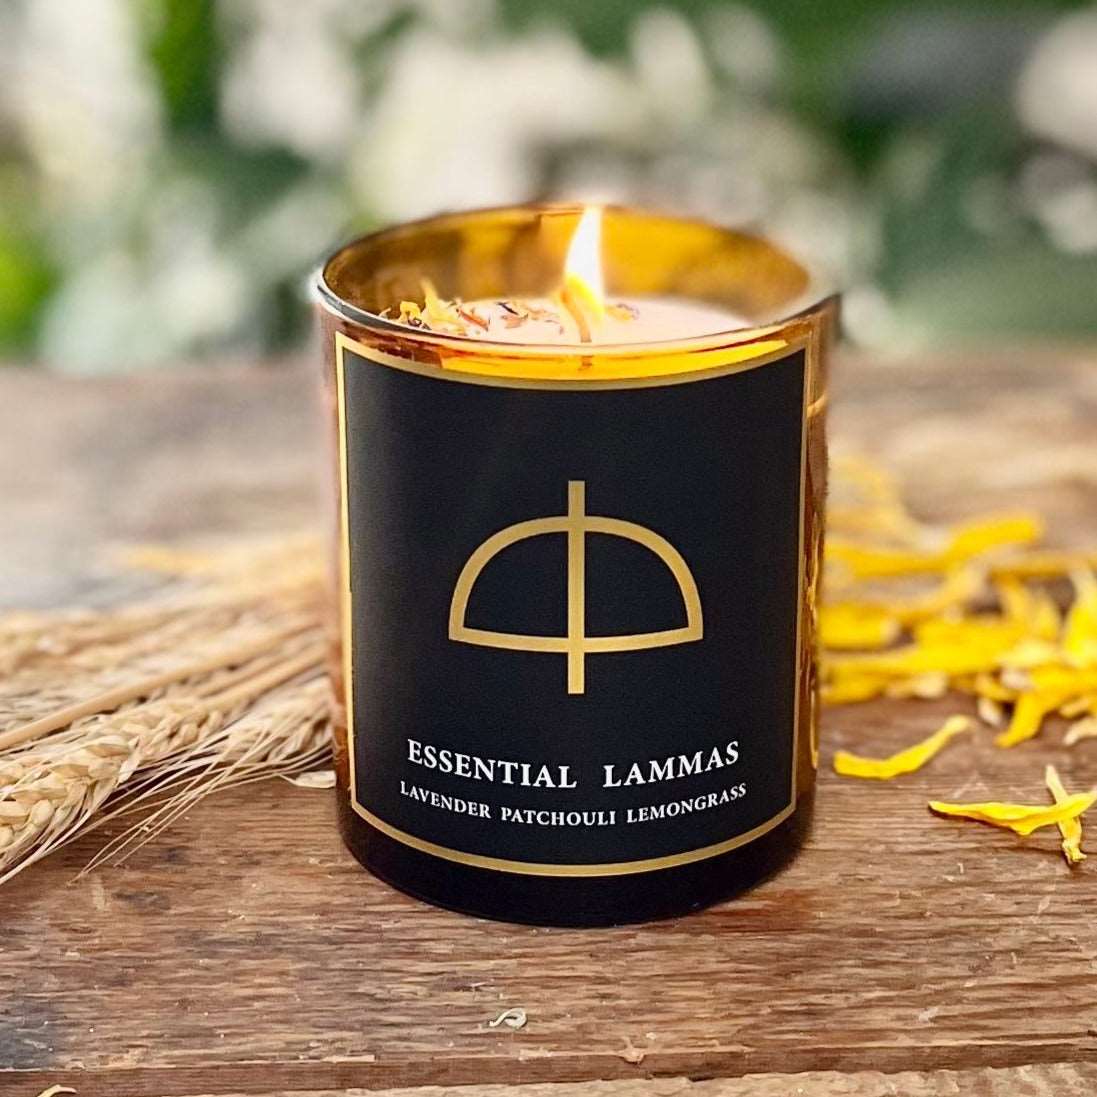 8.5 oz Natural GMM-Free Soy Wax Lammas | Essential Candle for Harvest Celebrations, Tranquility, and Earthy Aromas with Organic Lavender, Patchouli, Lemongrass Essential Oils, and Amethyst Crystal